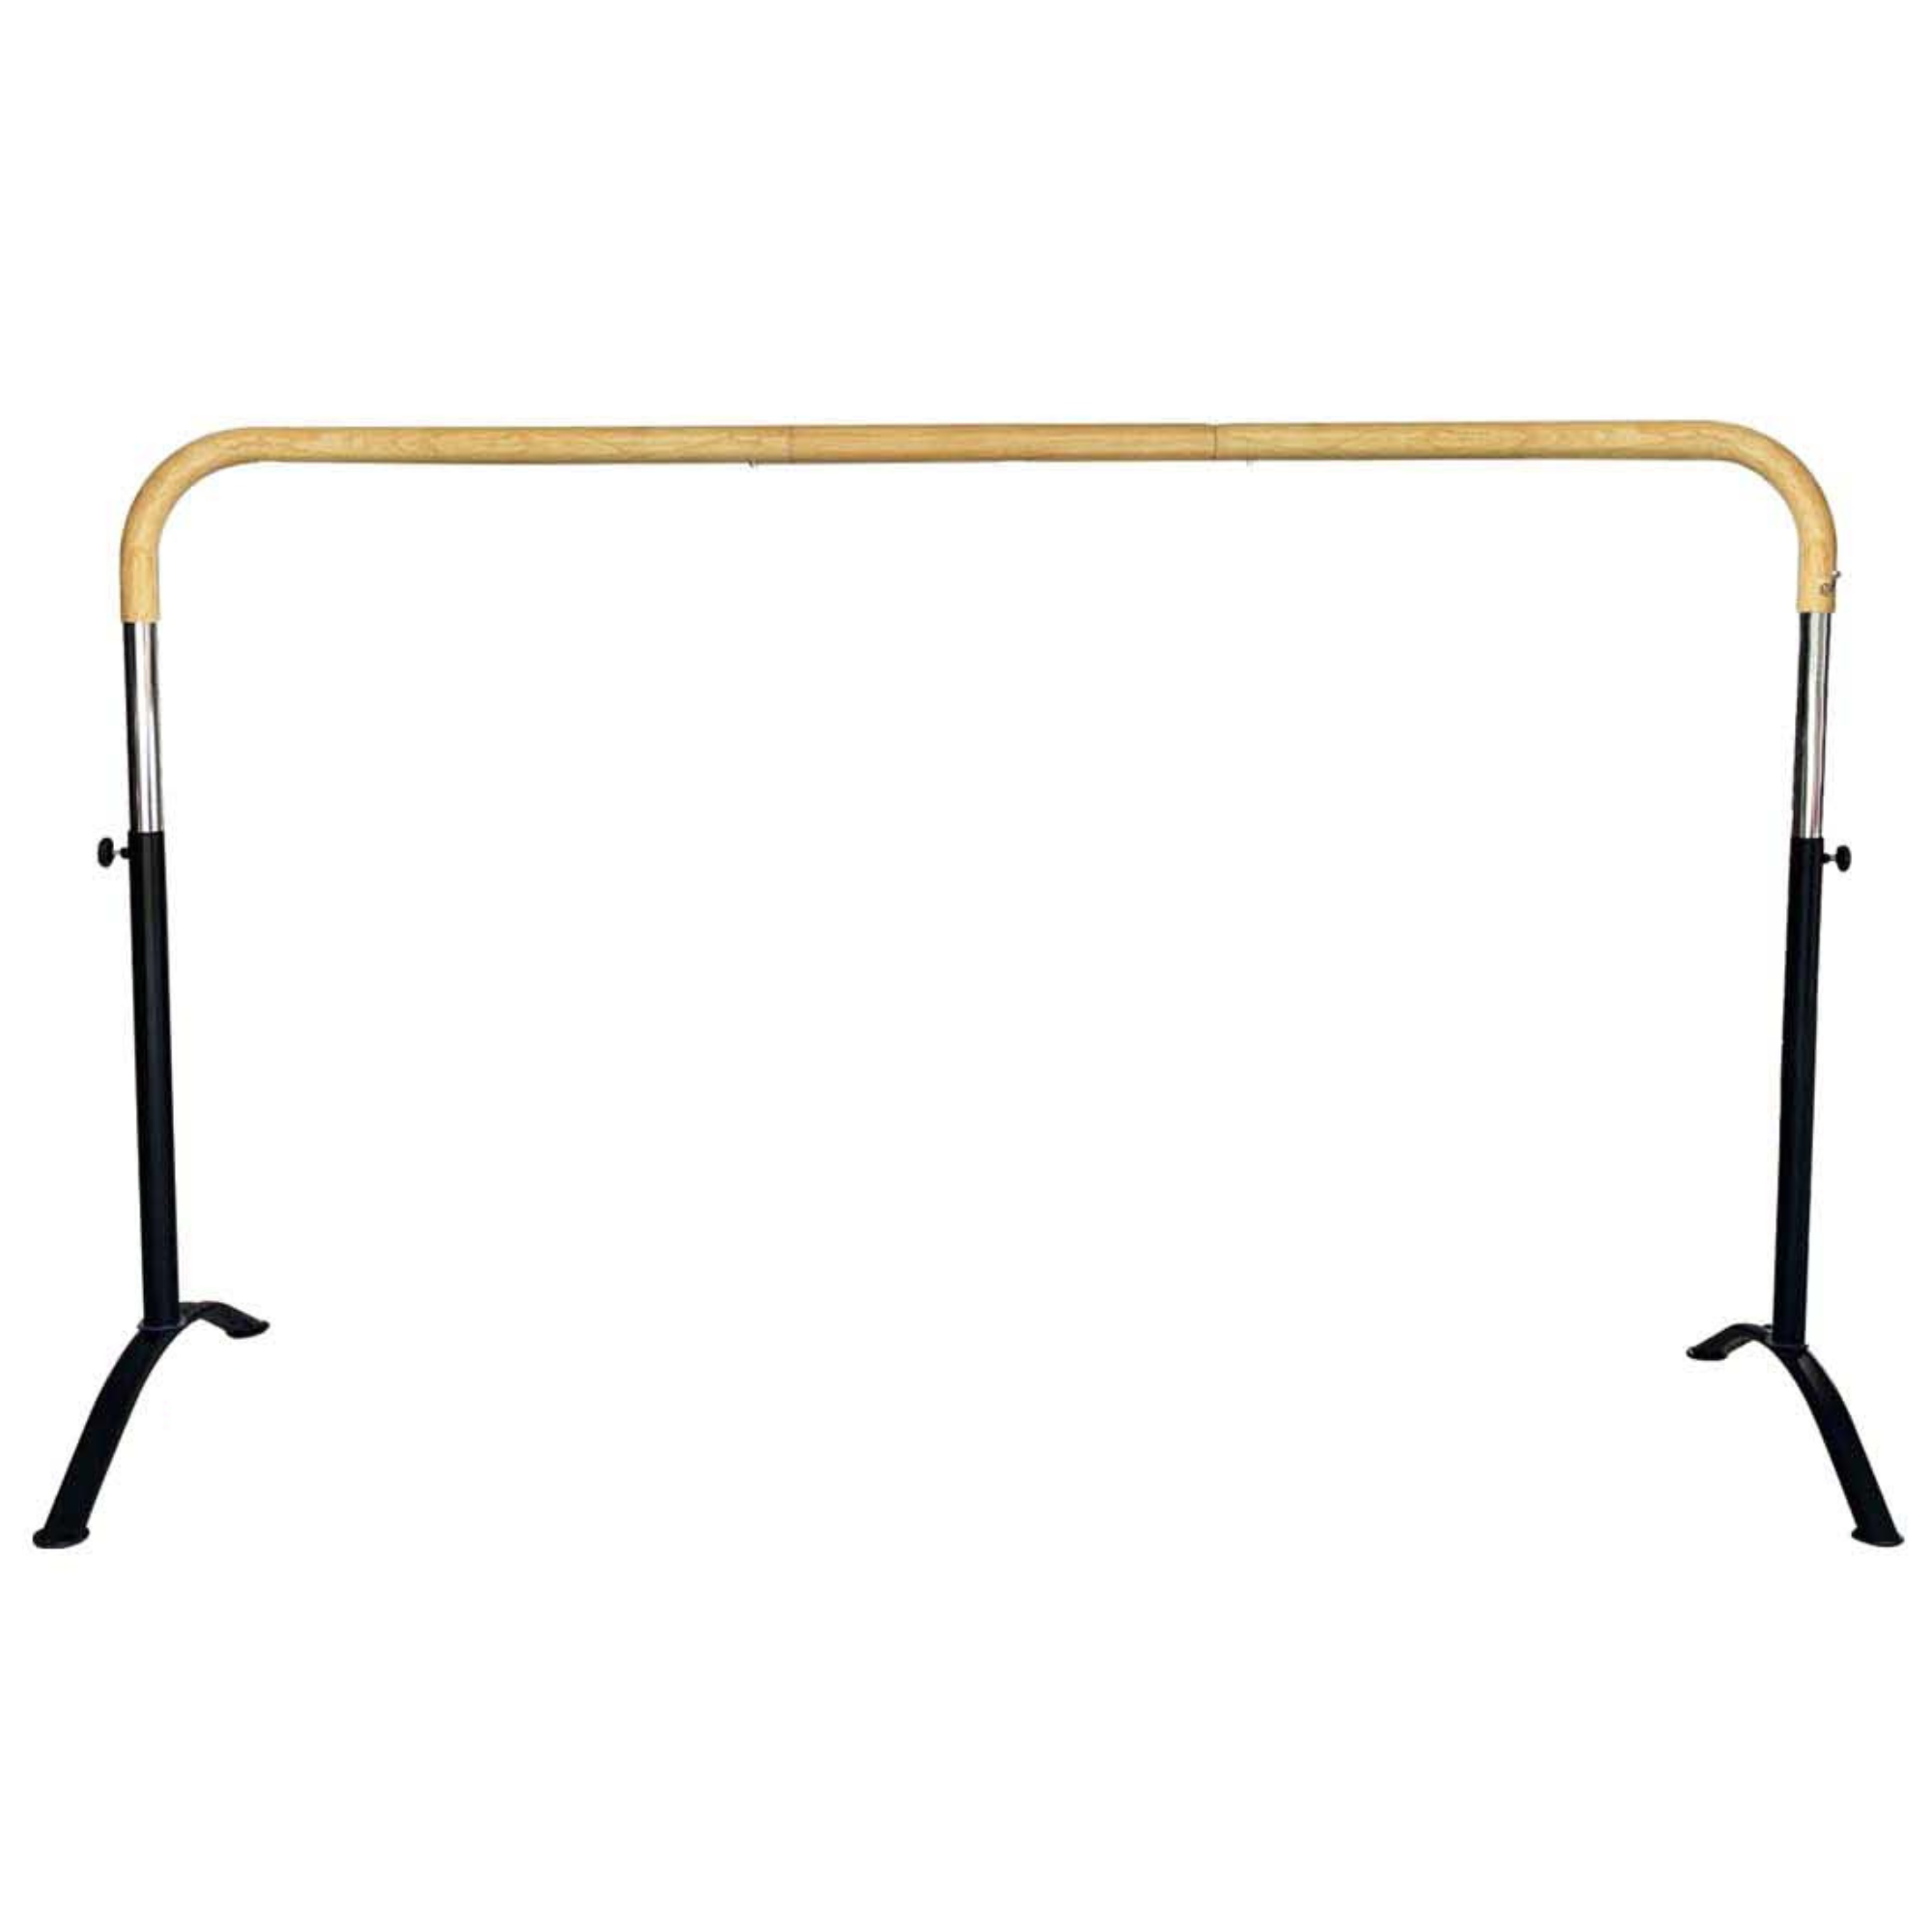 NEW!!! Ballet Barre Portable for Home or Studio, 6 ft Extendable to 12 ft Bar with Curved Shape